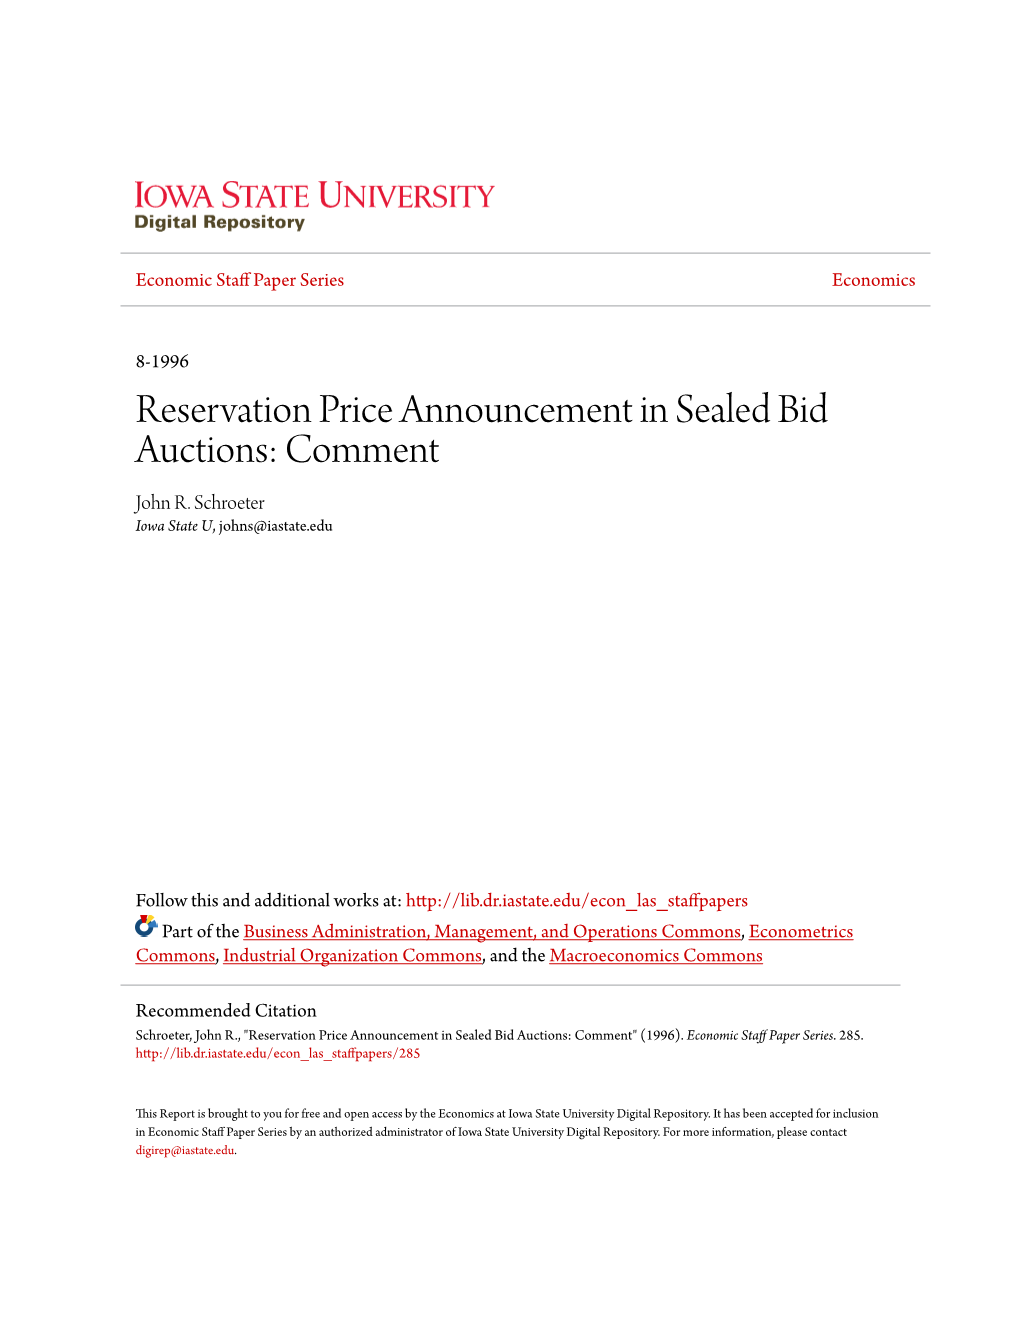 Reservation Price Announcement in Sealed Bid Auctions: Comment John R